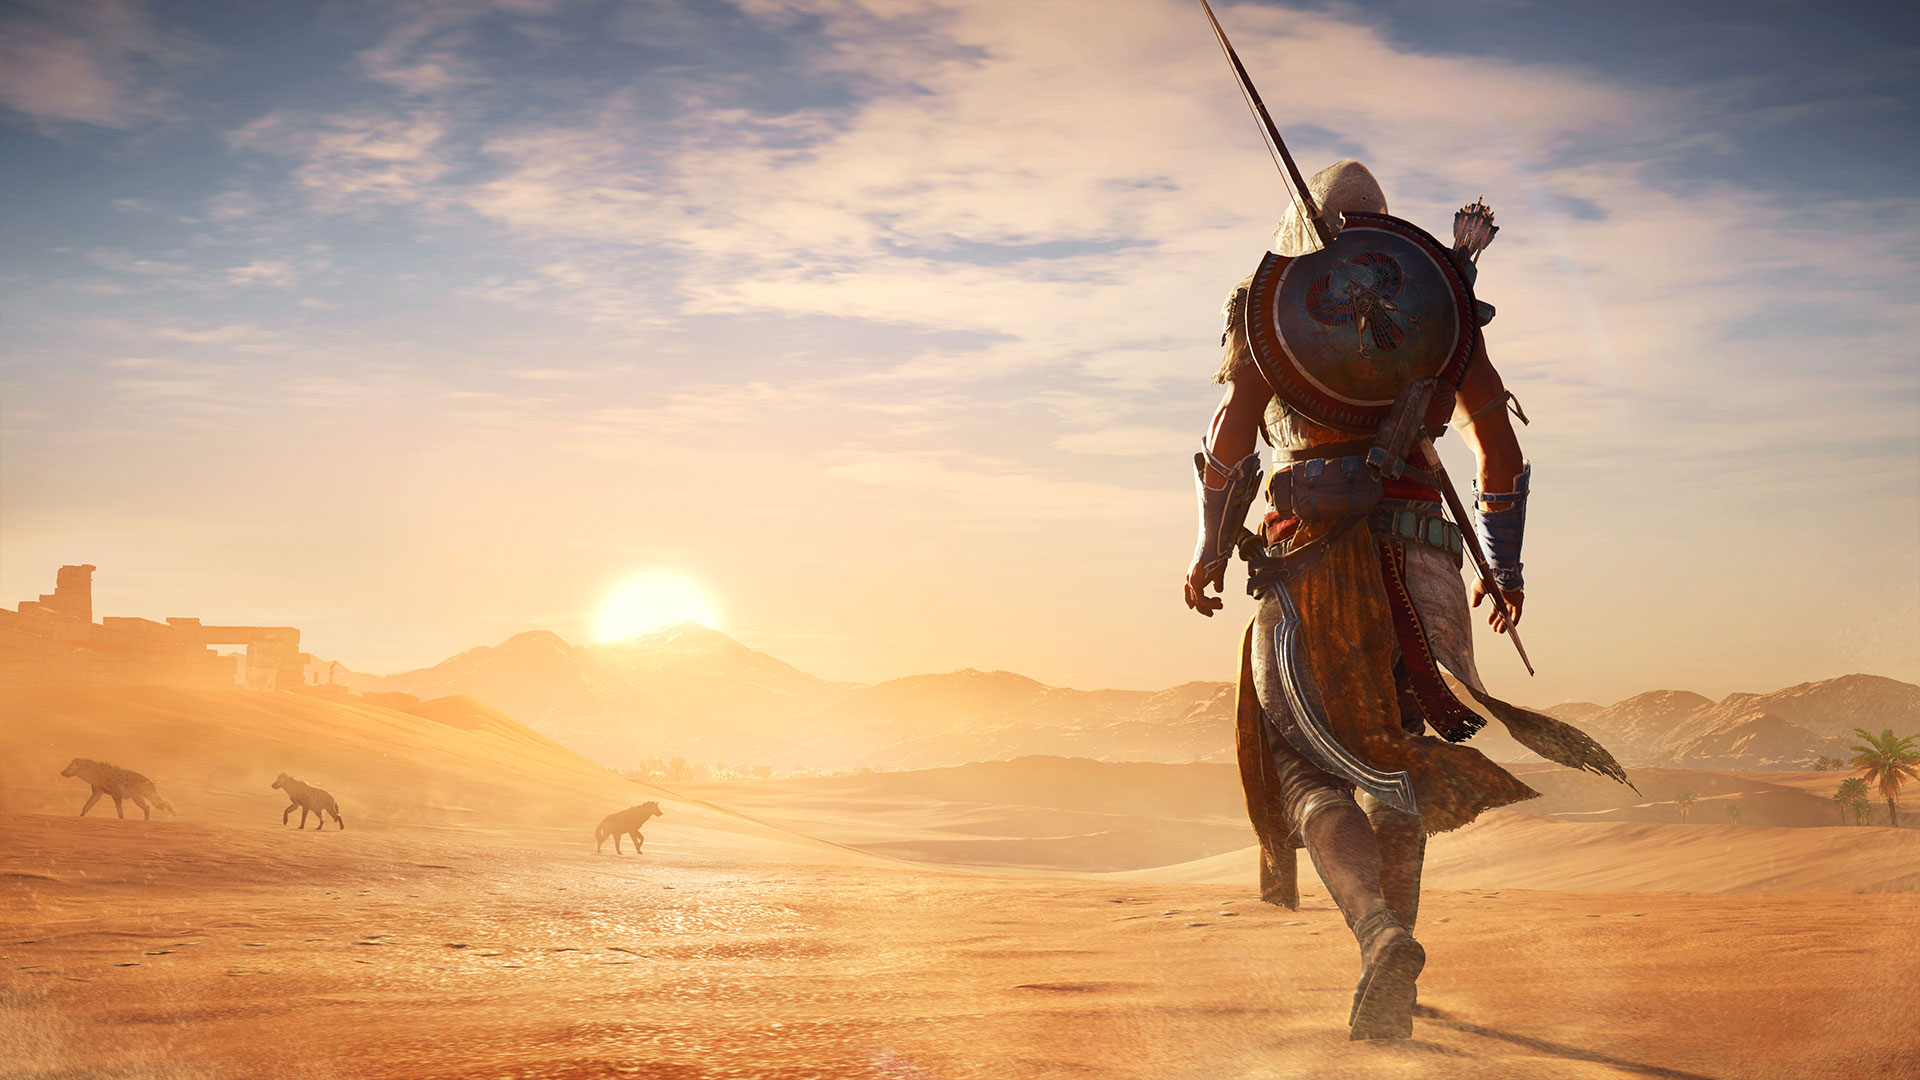 ASSASSIN’S CREED ORIGINS PC Download Free Full Game For windows